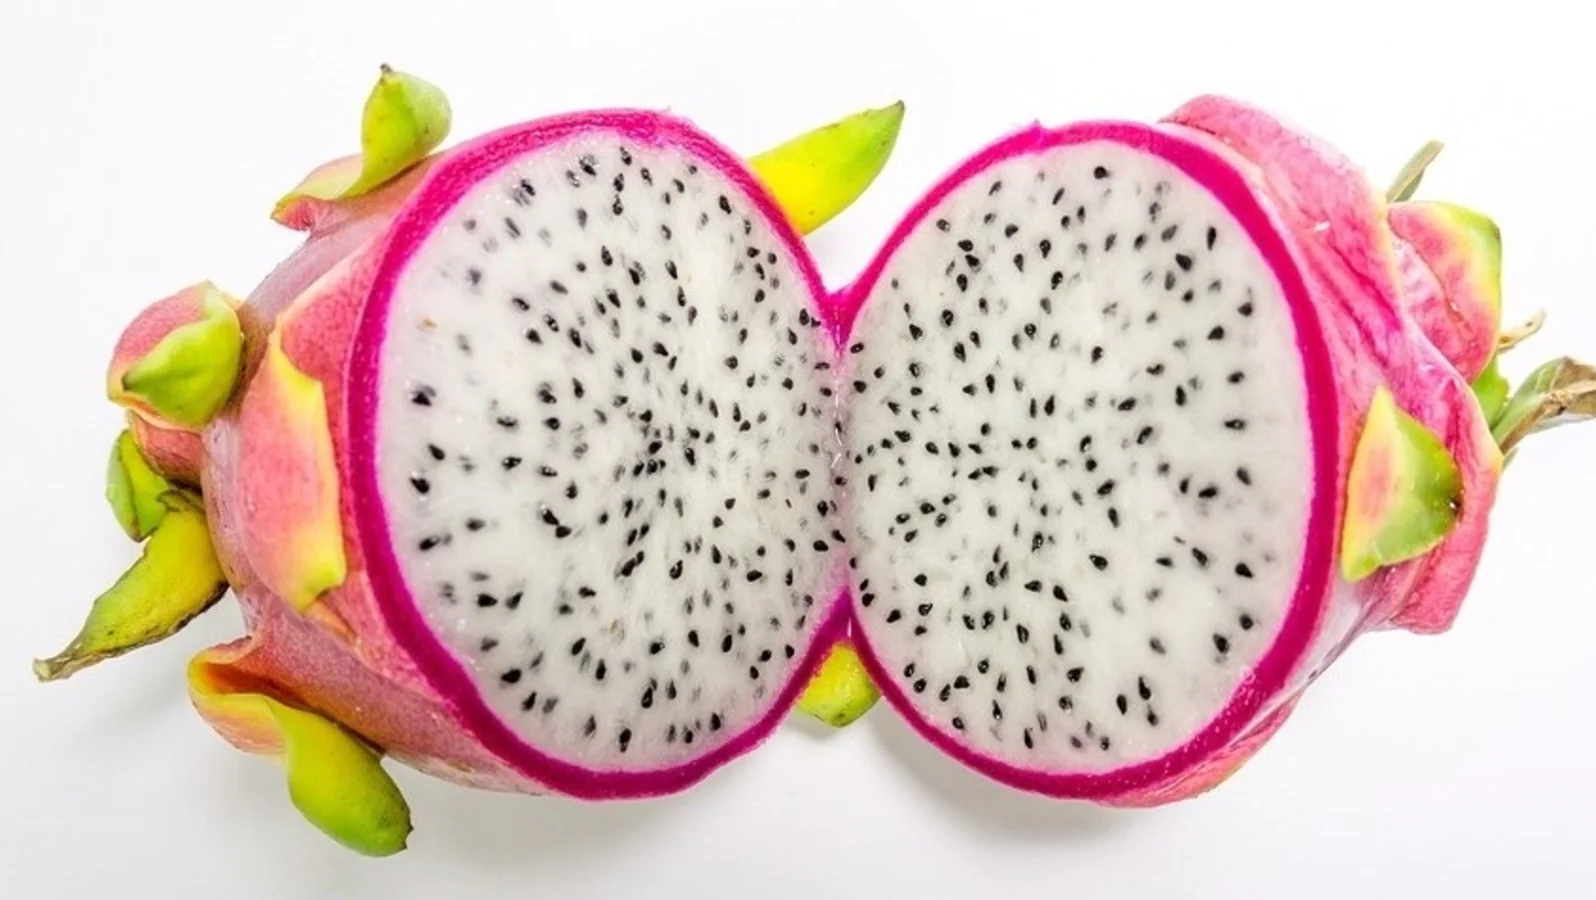 Eat dragon fruit in summer season for these wonderful benefits